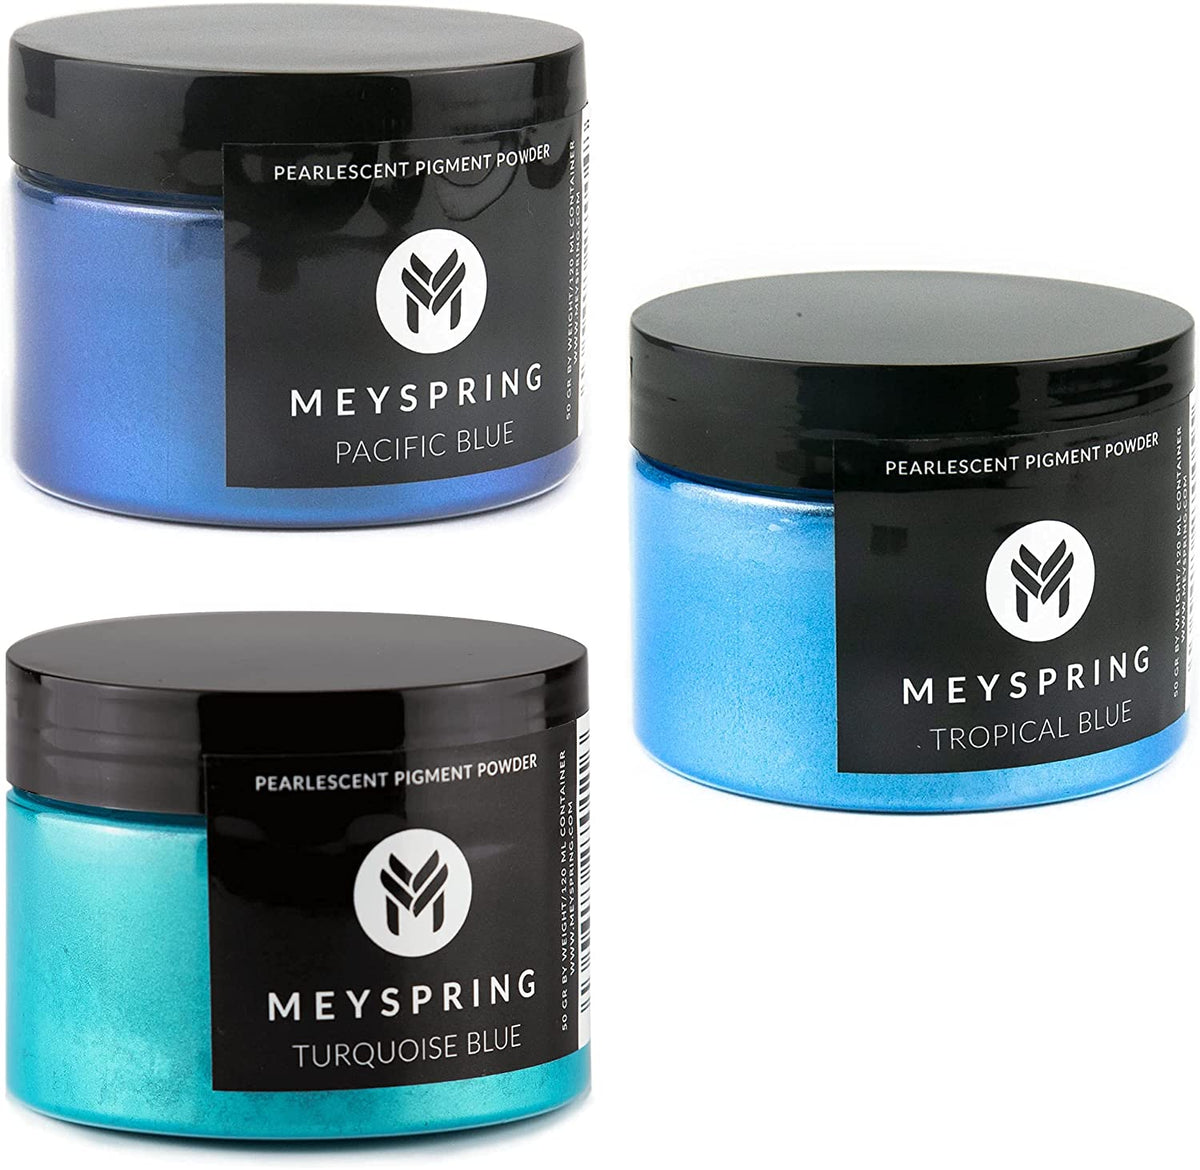 MEYSPRING Pacific Blue Epoxy Resin Color Pigment - 50 Grams - Great for Resin Art, Epoxy Resin, and UV Resin - Mica Powder for Epoxy Resin